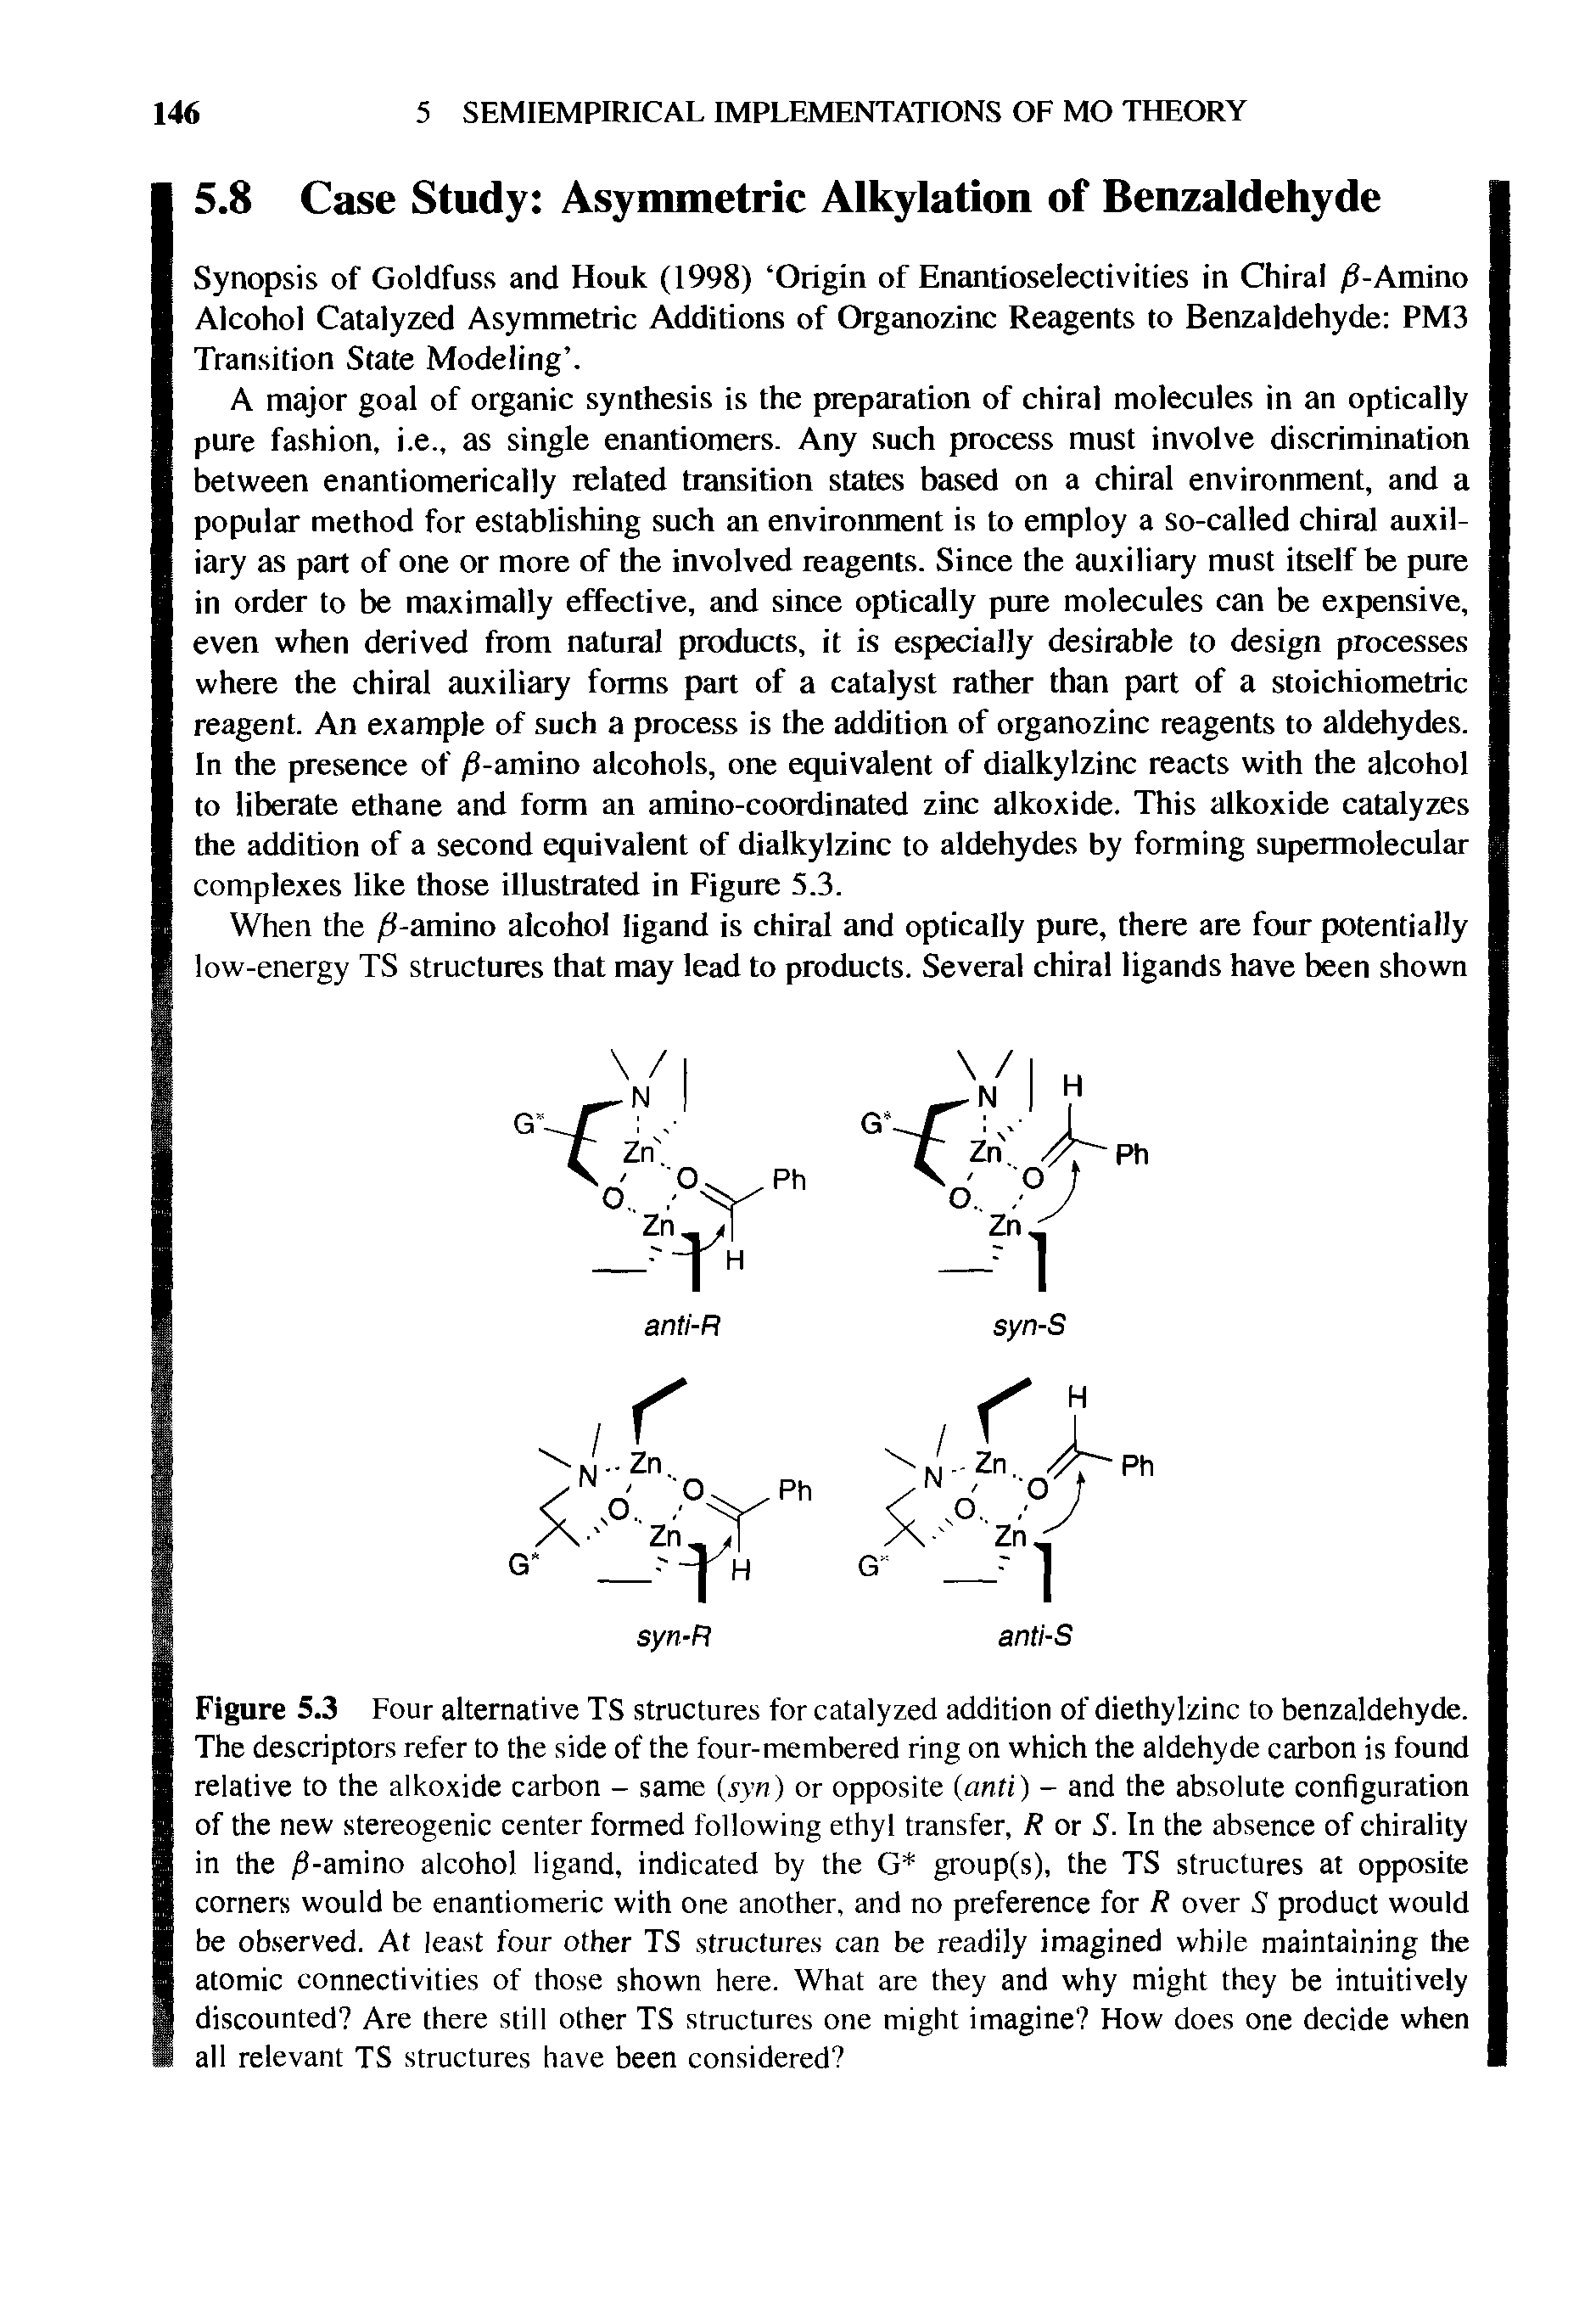 Figure 5.3 Four alternative TS structures for catalyzed addition of diethylzinc to benzaldehyde. The descriptors refer to the side of the four-membered ring on which the aldehyde carbon is found relative to the alkoxide carbon - same (syn) or opposite (anti) - and the absolute configuration of the new stereogenic center formed following ethyl transfer, R or S. In the absence of chirality in the /3-amino alcohol ligand, indicated by the G group(s), the TS structures at opposite corners would be enantiomeric with one another, and no preference for R over 5 product would...